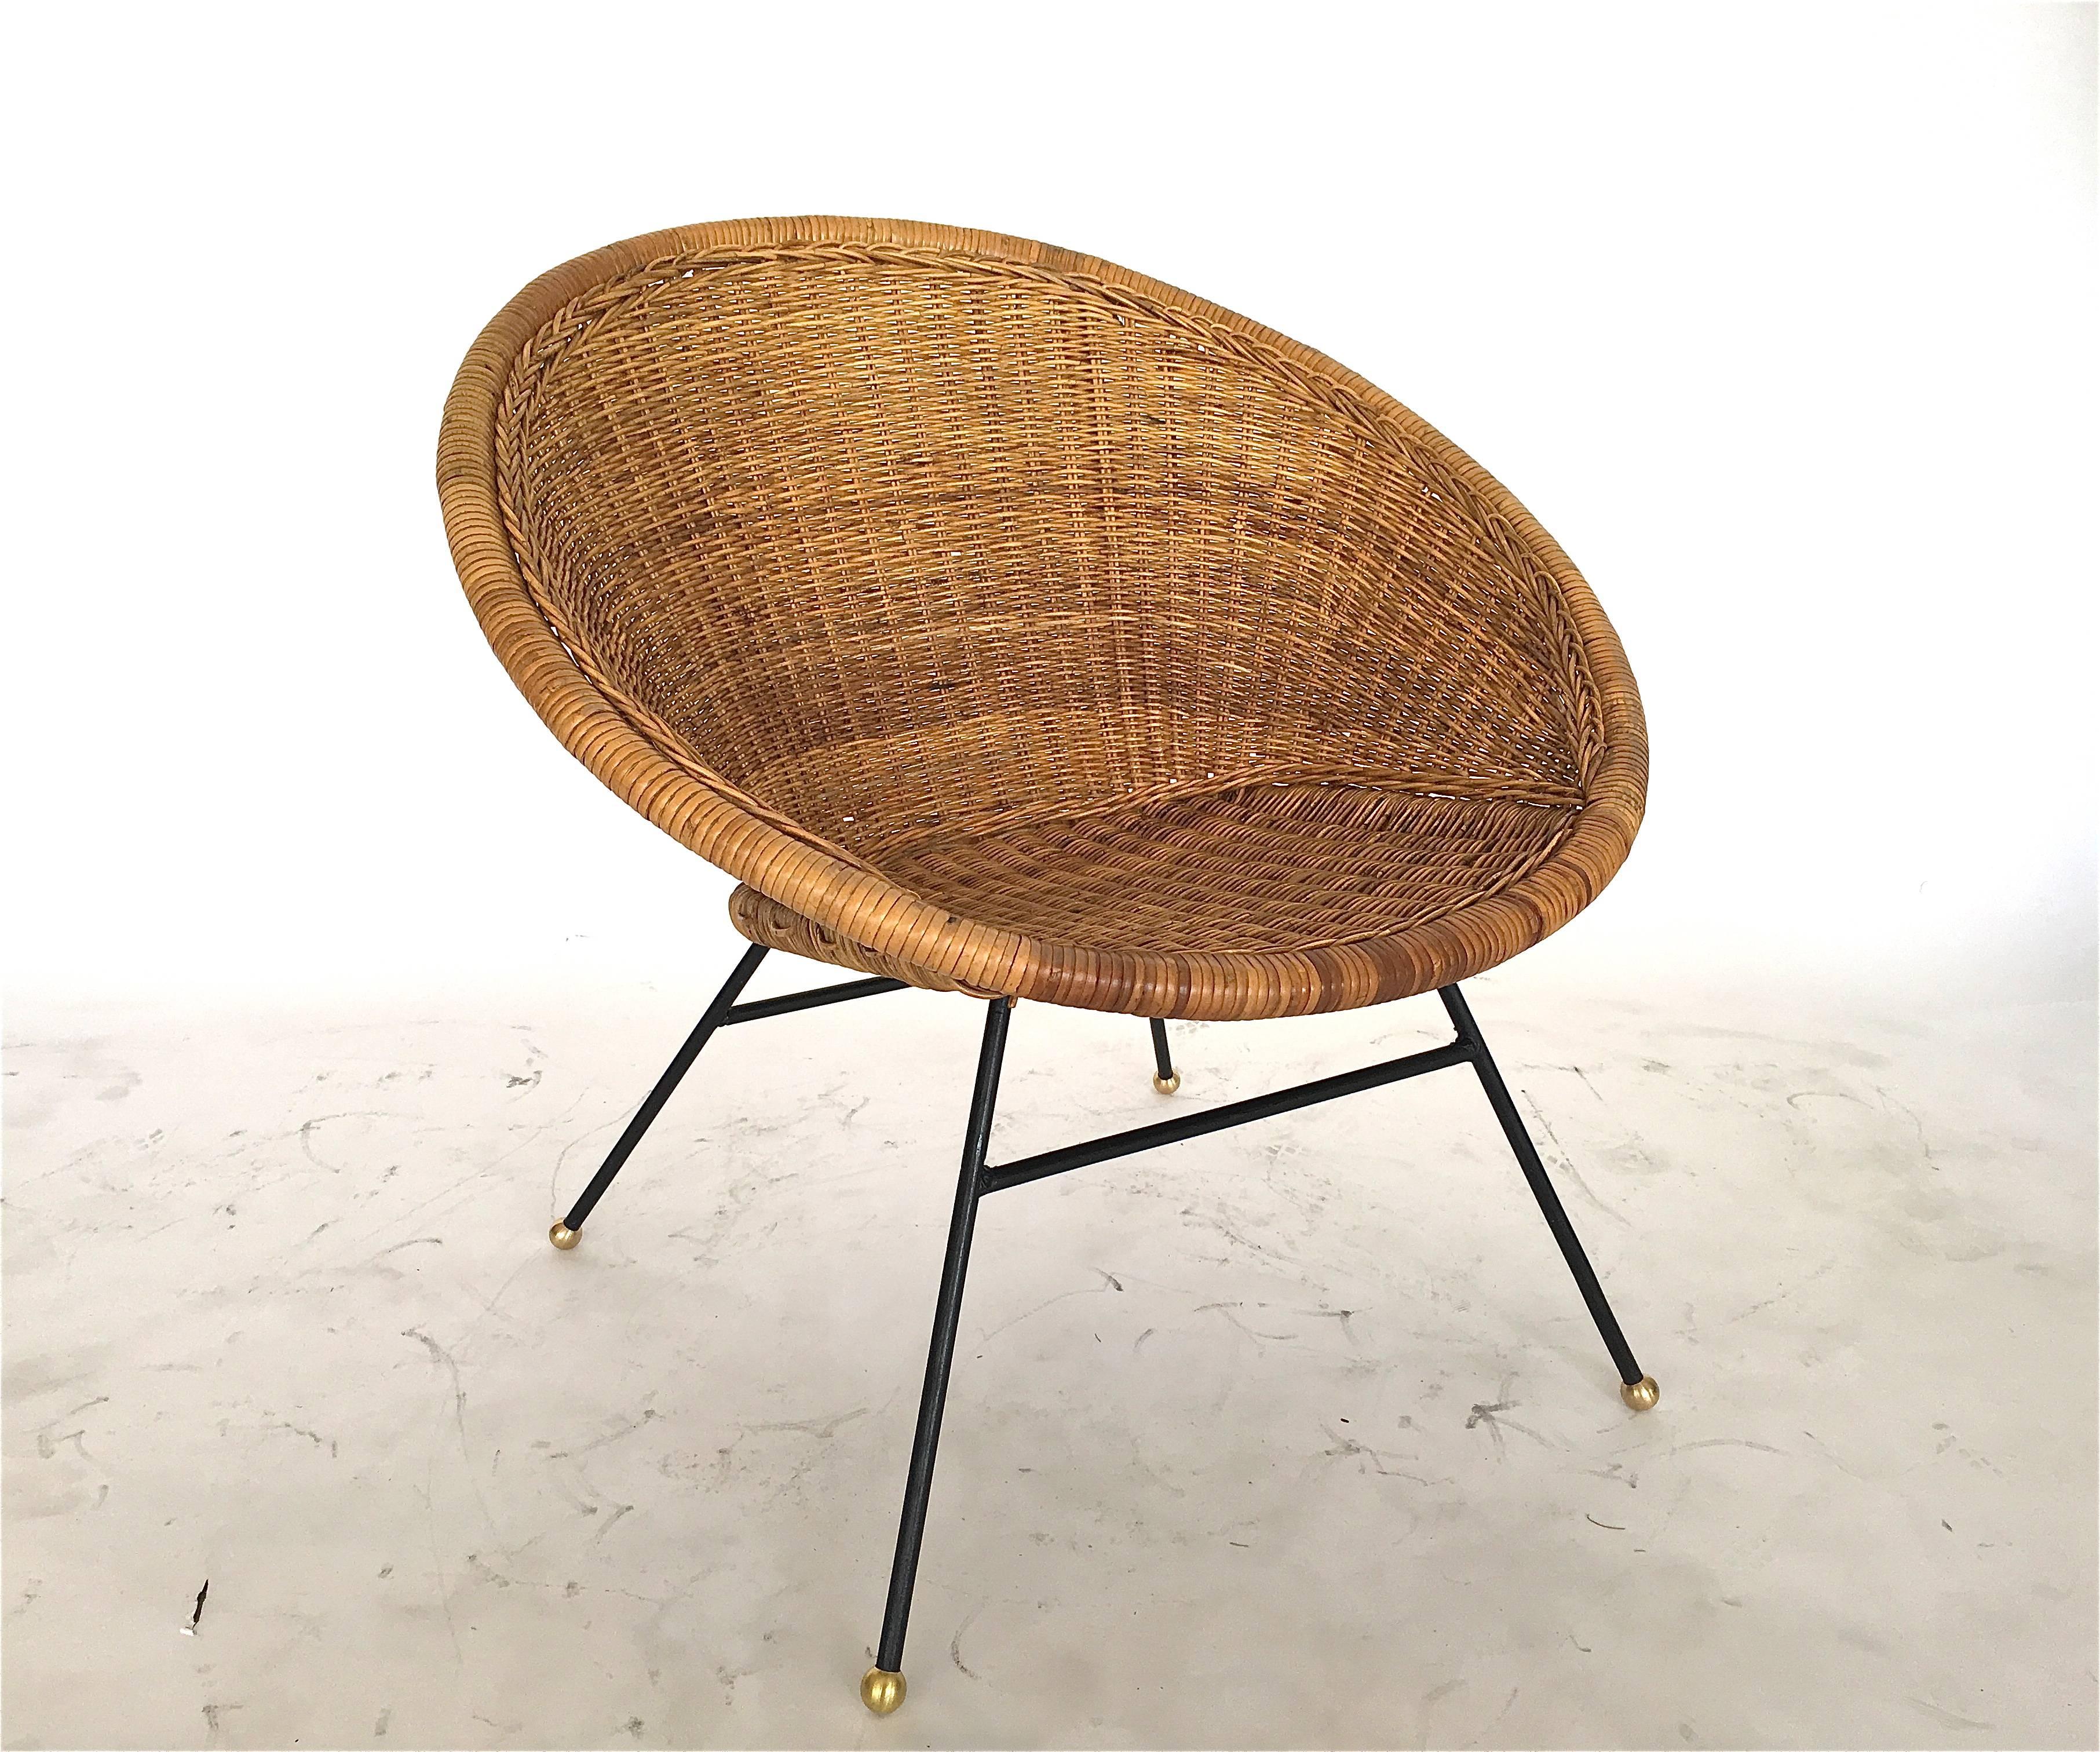 Wonderful wicker and iron bucket chair. Wicker in excellent condition. Scooped wicker seat sits on solid iron legs with brass ball feet. Perfect for the home or covered outdoor patio. Only one chair available in this style.
Similar styles available.